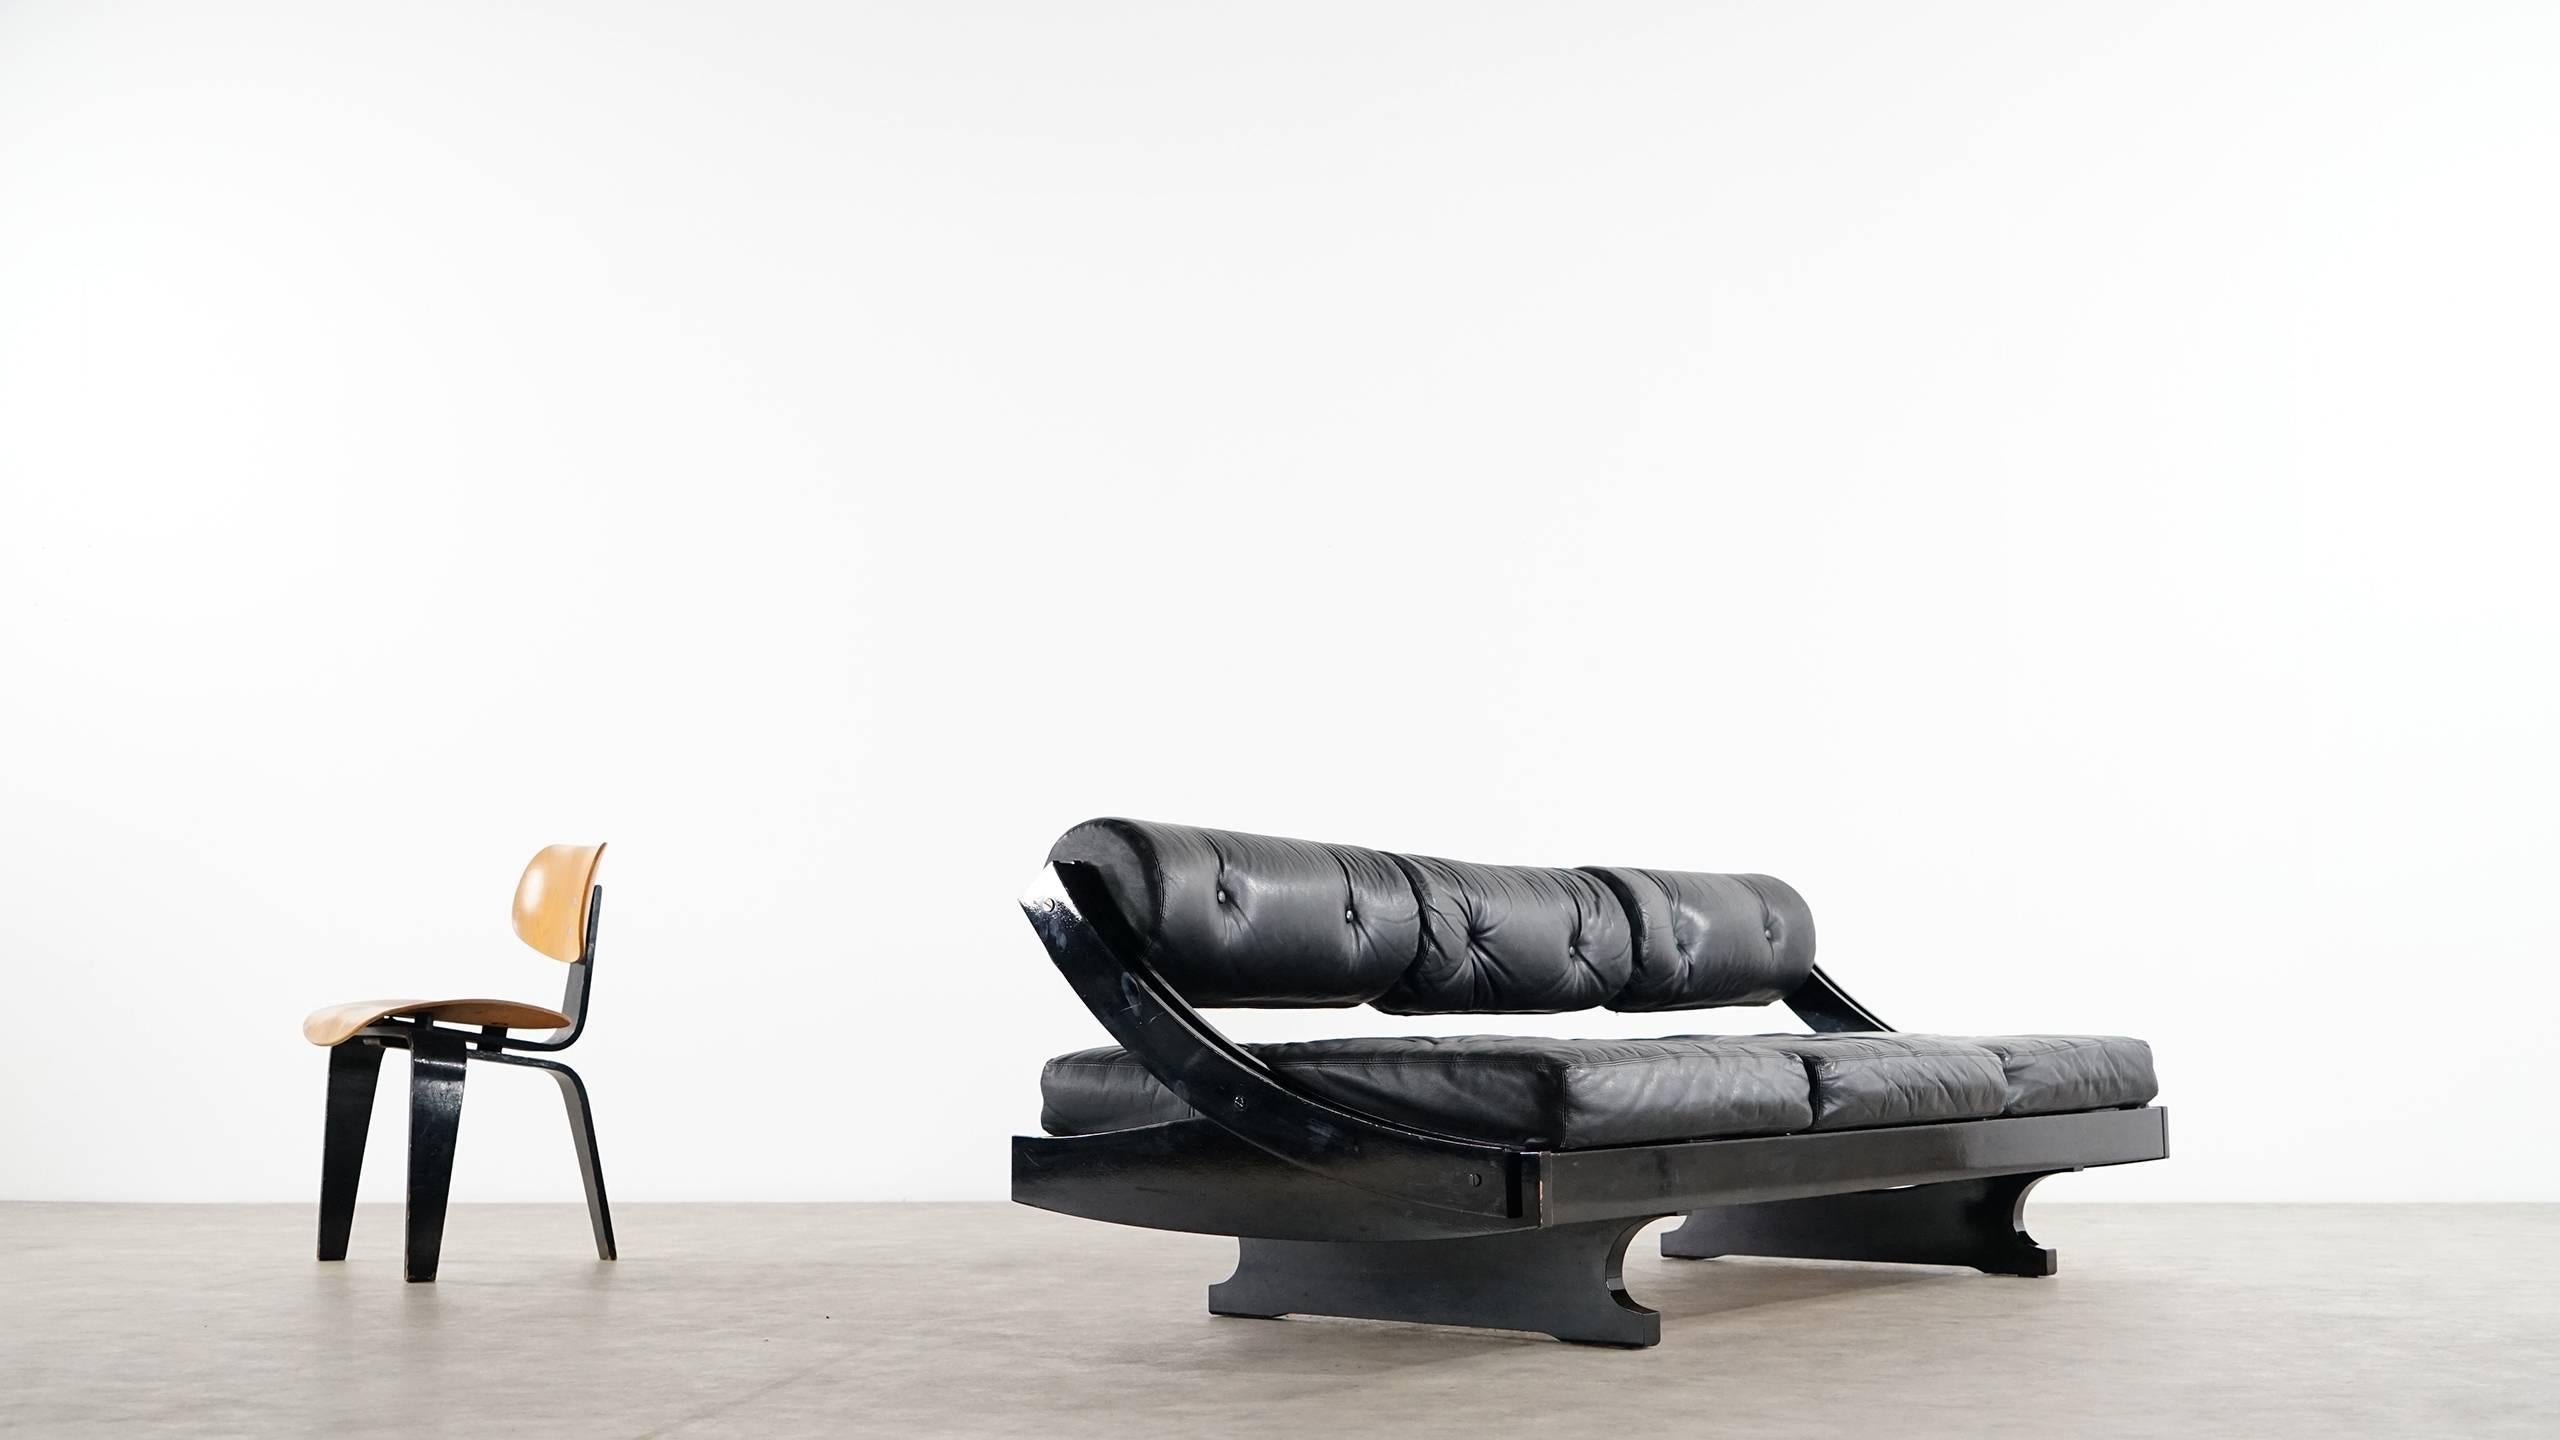 Elegant black and black version of the famous GS195 daybed, designed in 1963 by Gianni Songia for Sormani. The backrest can be adapte to make it a daybed, black leather and shiny black wooden frame. All original!